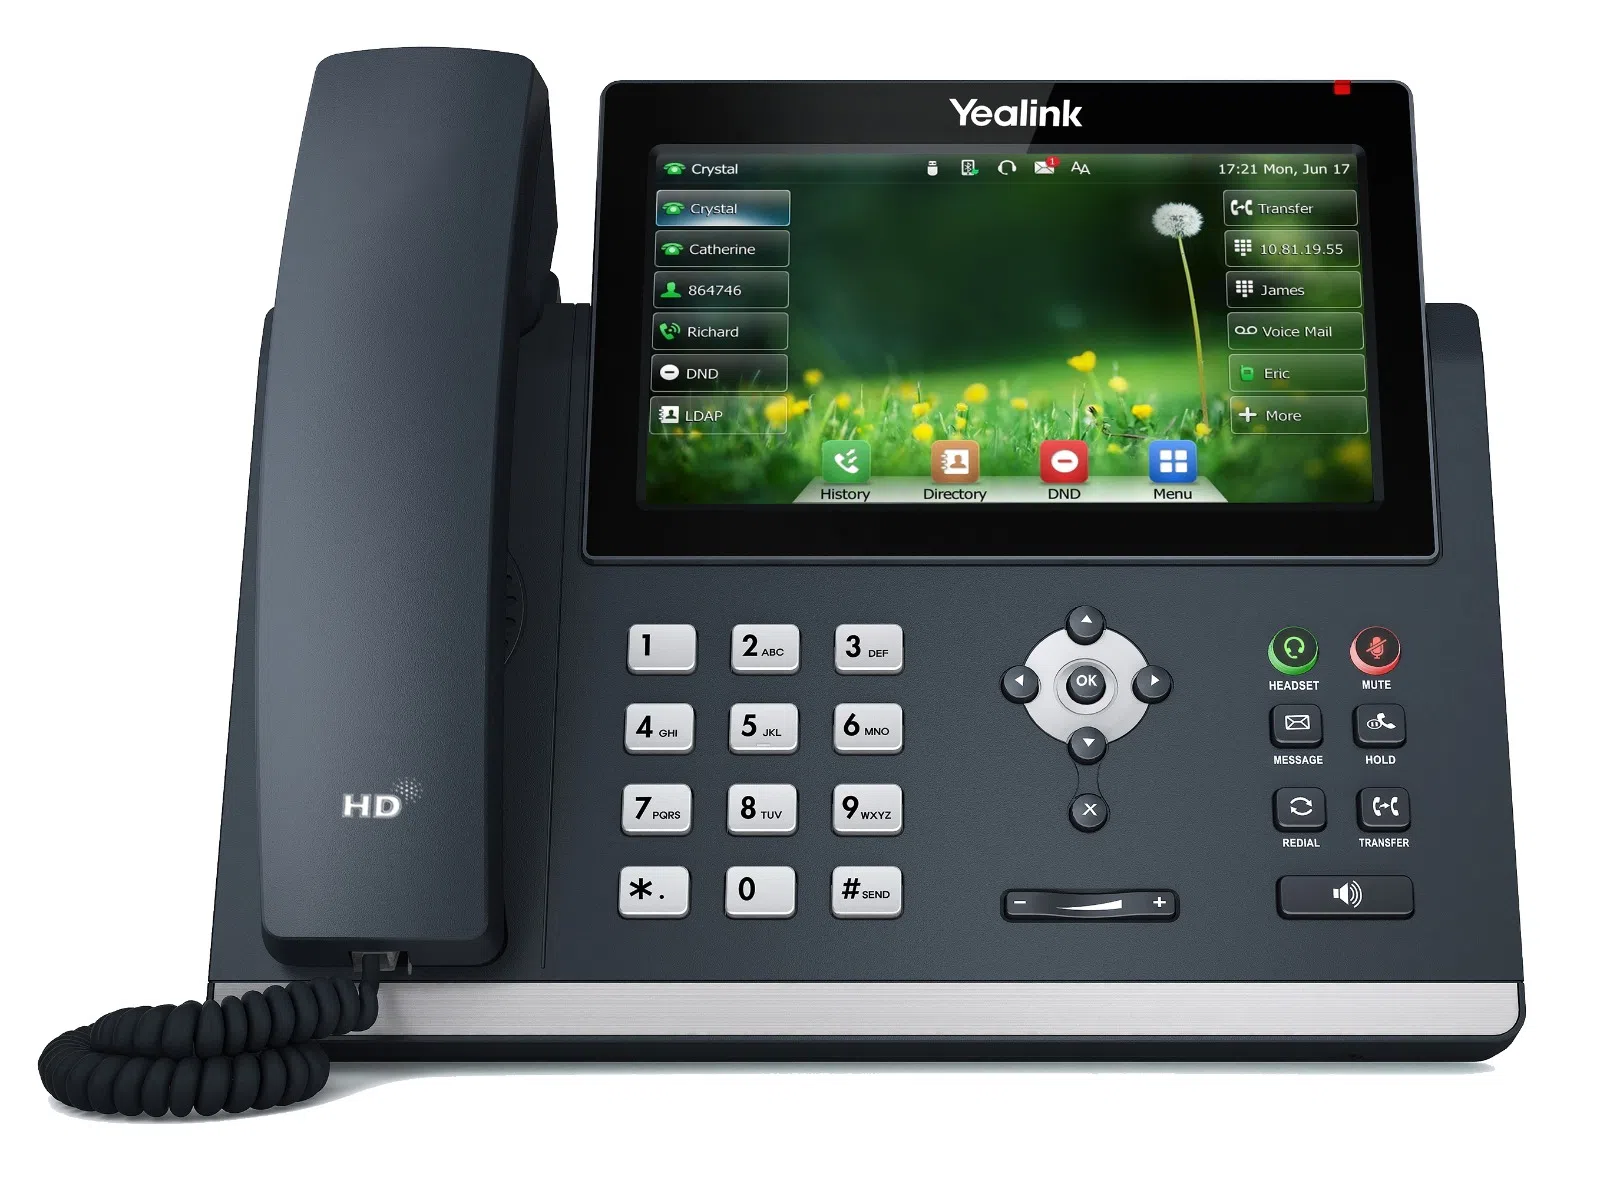 Is there Bluetooth functionality in the Yealink T48U Touchscreen IP Phone?